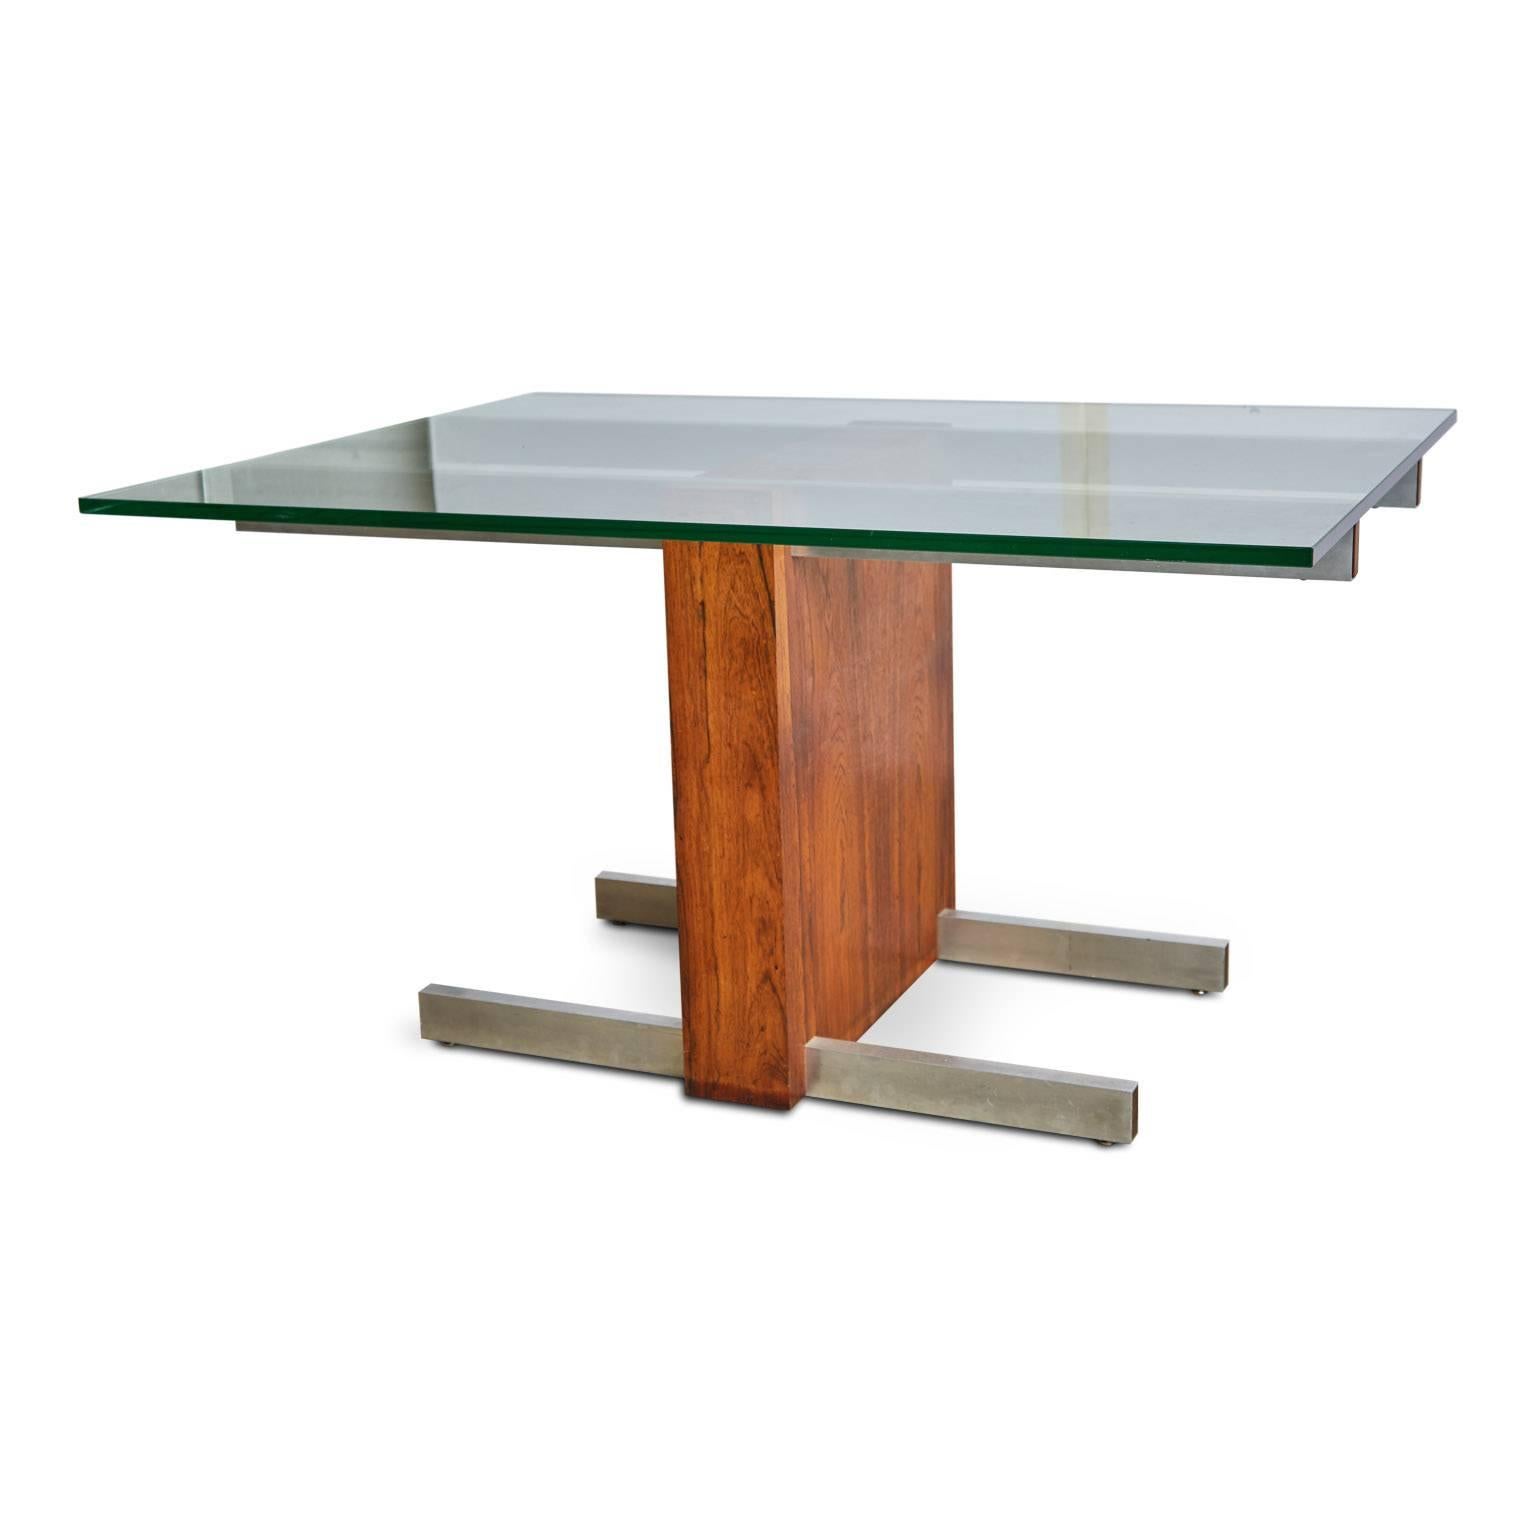 Late 20th Century Vladimir Kagan Rosewood, Chrome and Glass Extension Dining Table, circa 1970